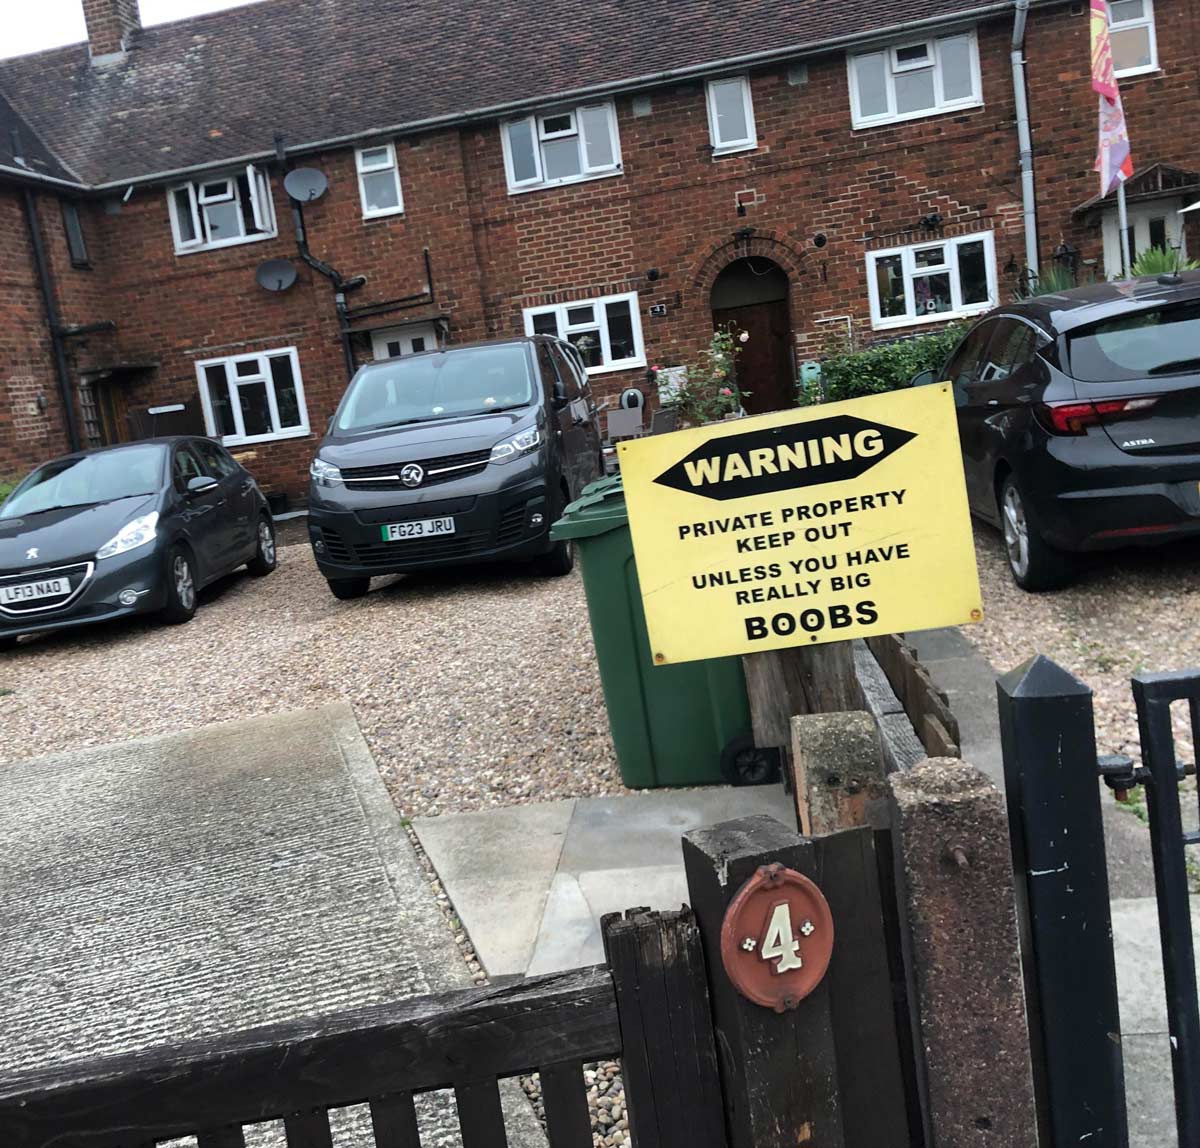 I was distributing leaflets and found this sign outside a house